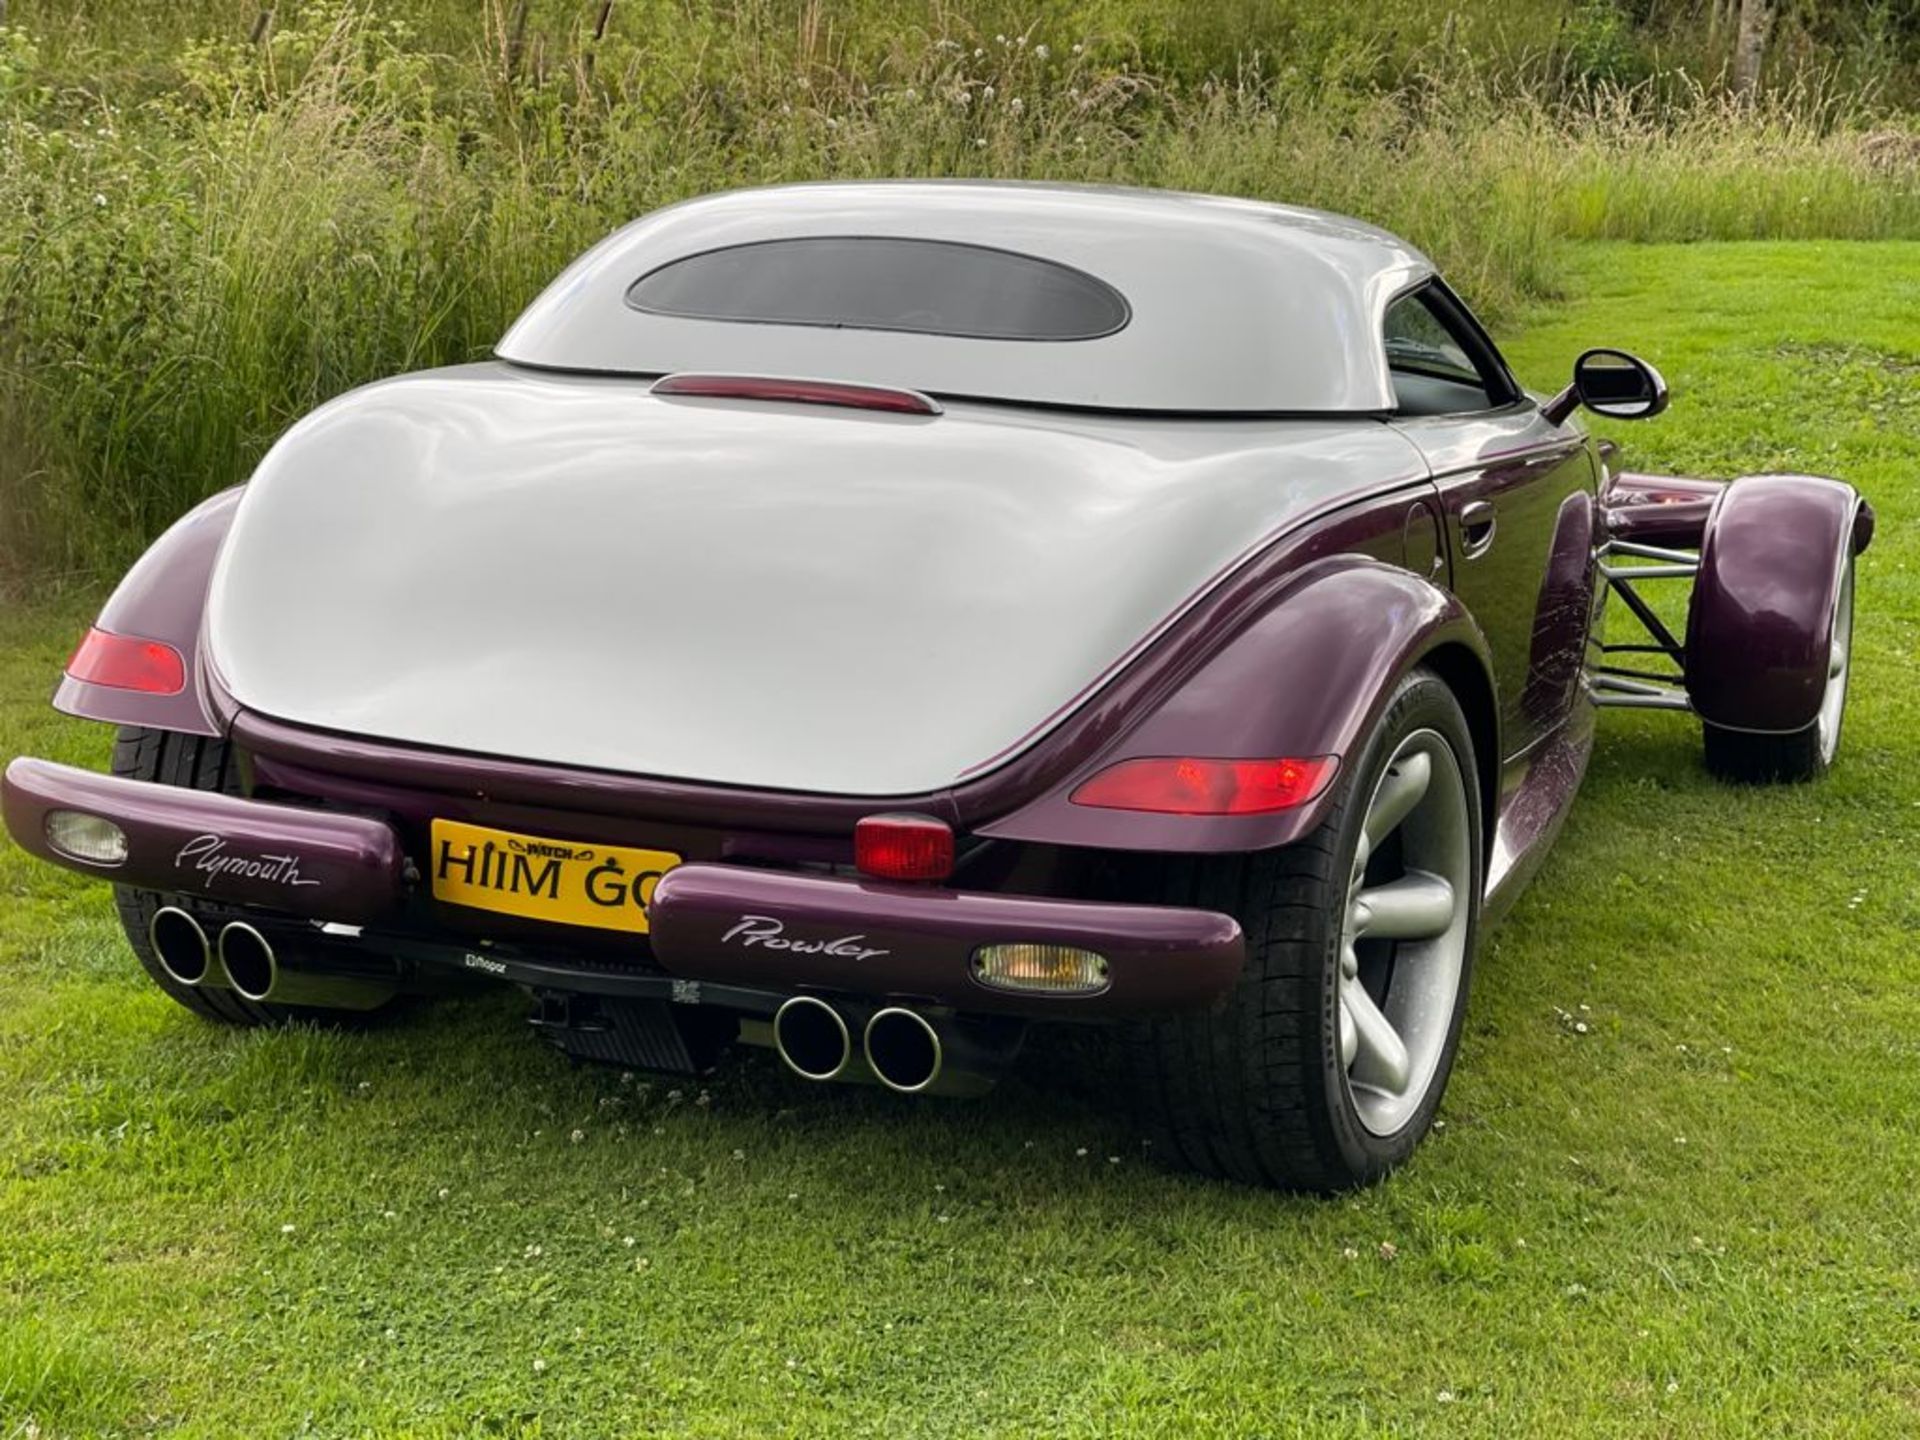 1998 CHRYSLER PLYMOUTH PROWLER V6 2 DOOR CONVERTIBLE, 3500cc PETROL ENGINE, AUTO *NO VAT* - Image 9 of 32